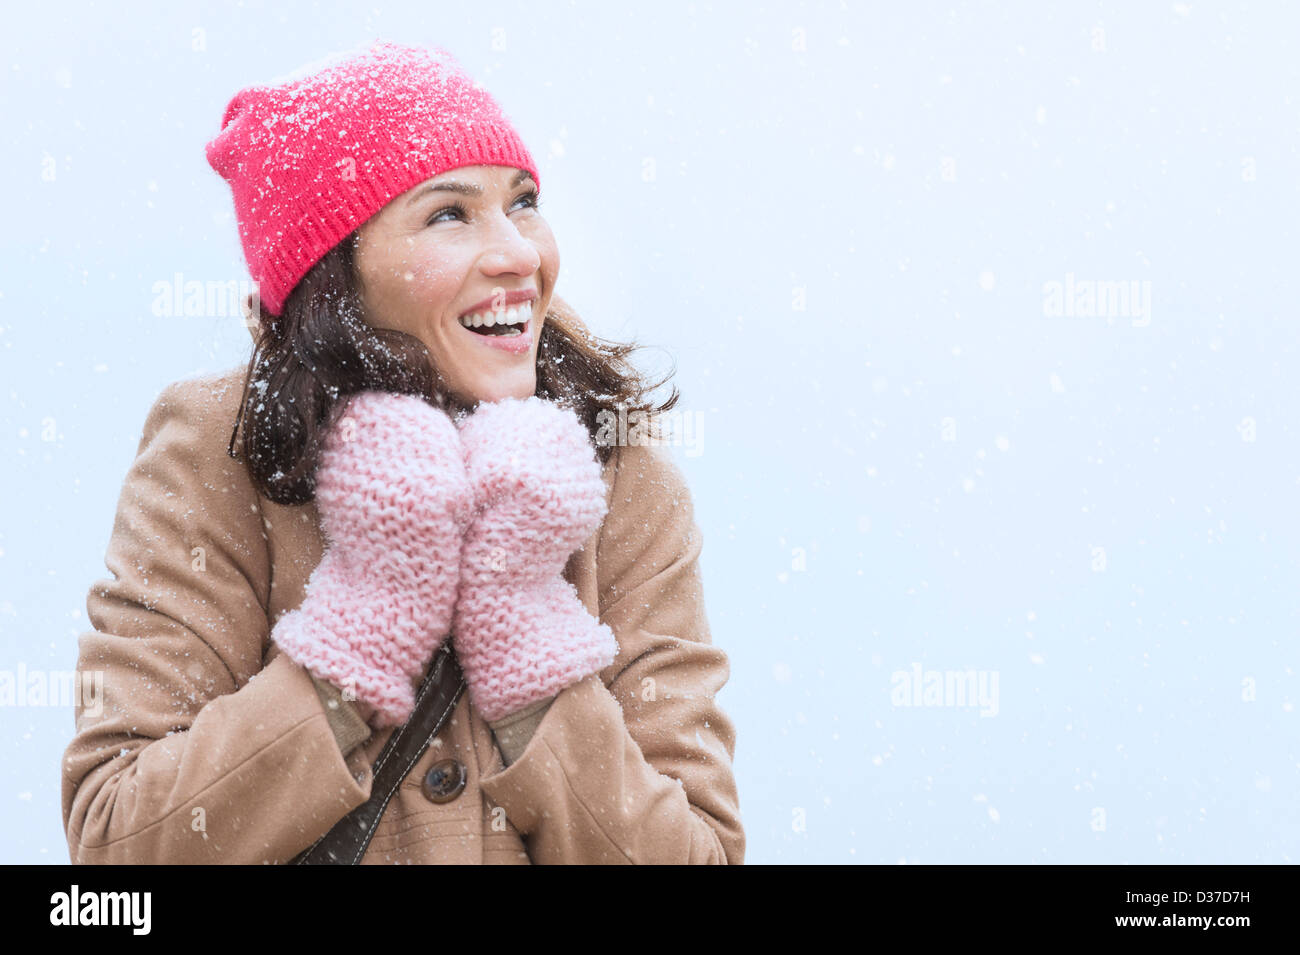 USA, New Jersey, Jersey City, Portrait of woman in winter clothes Stock Photo